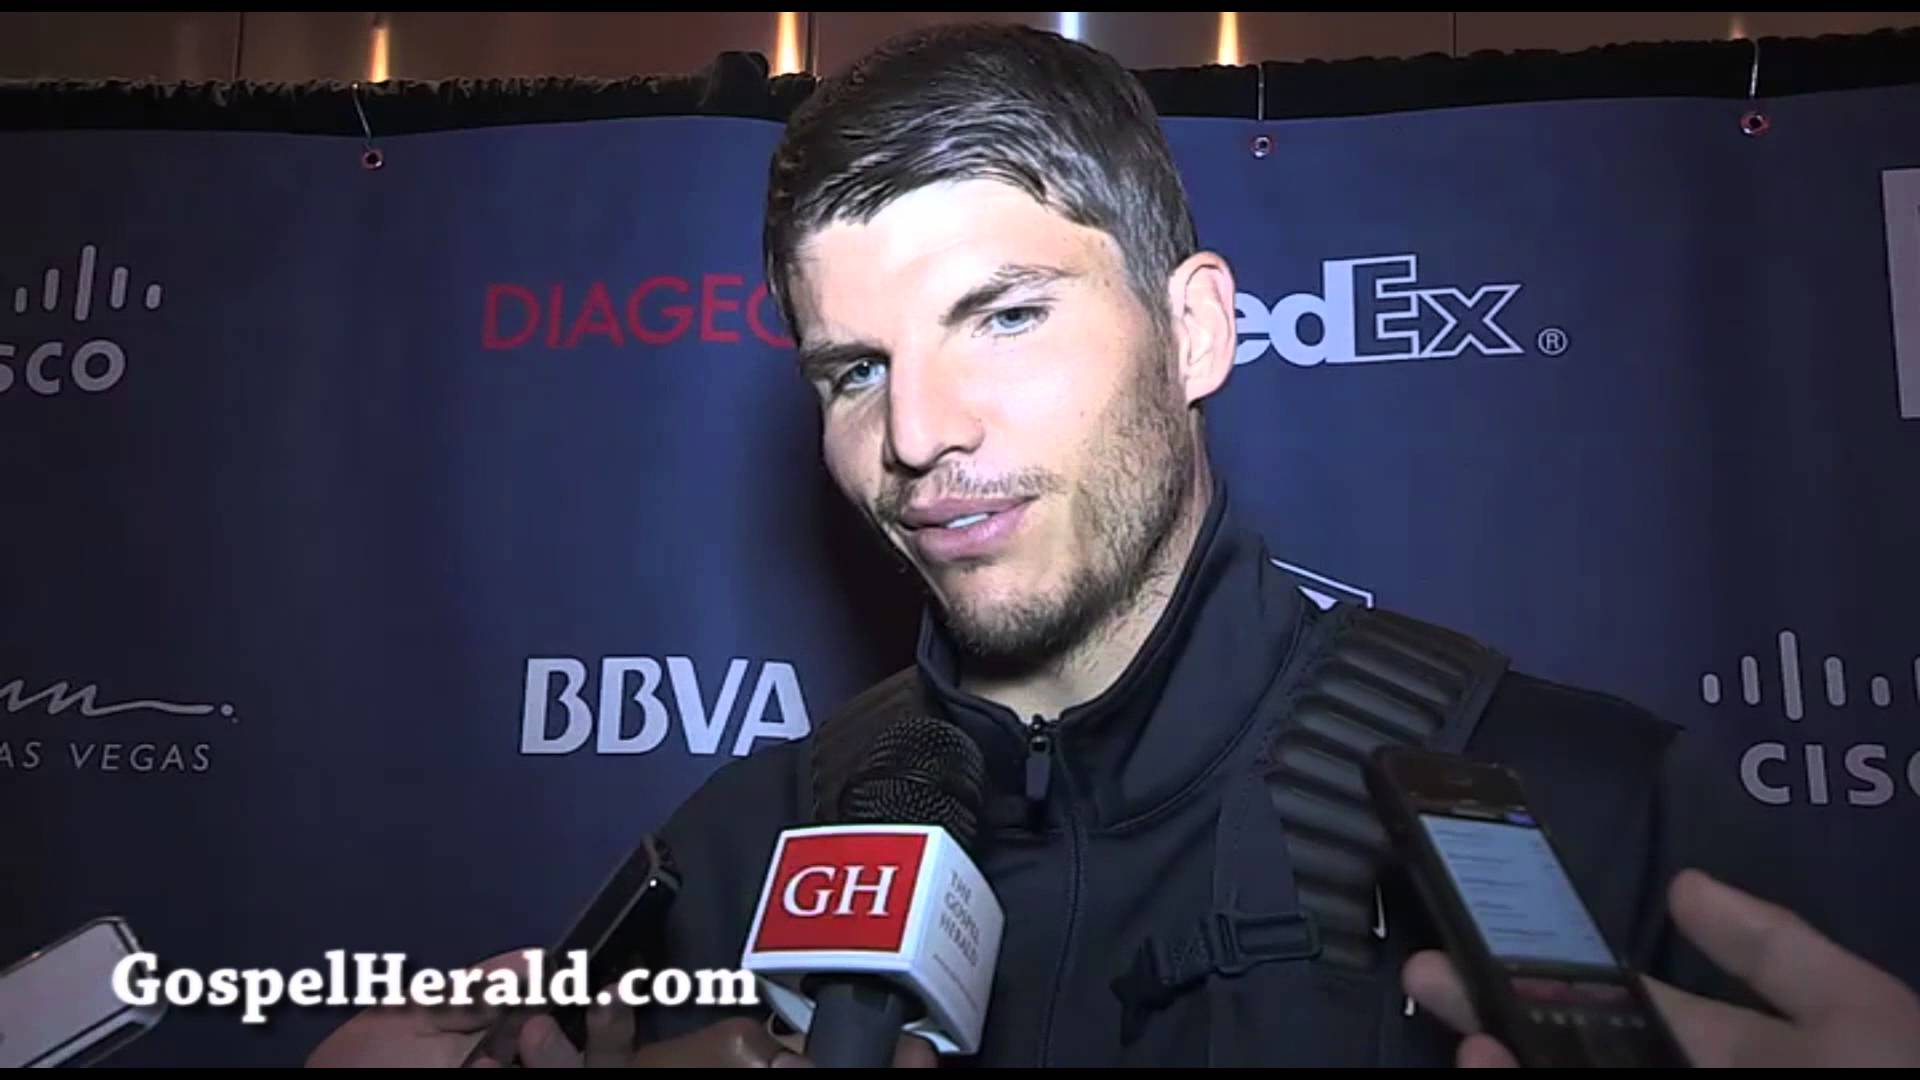 Kyle Korver on His Father's Influence - YouTube